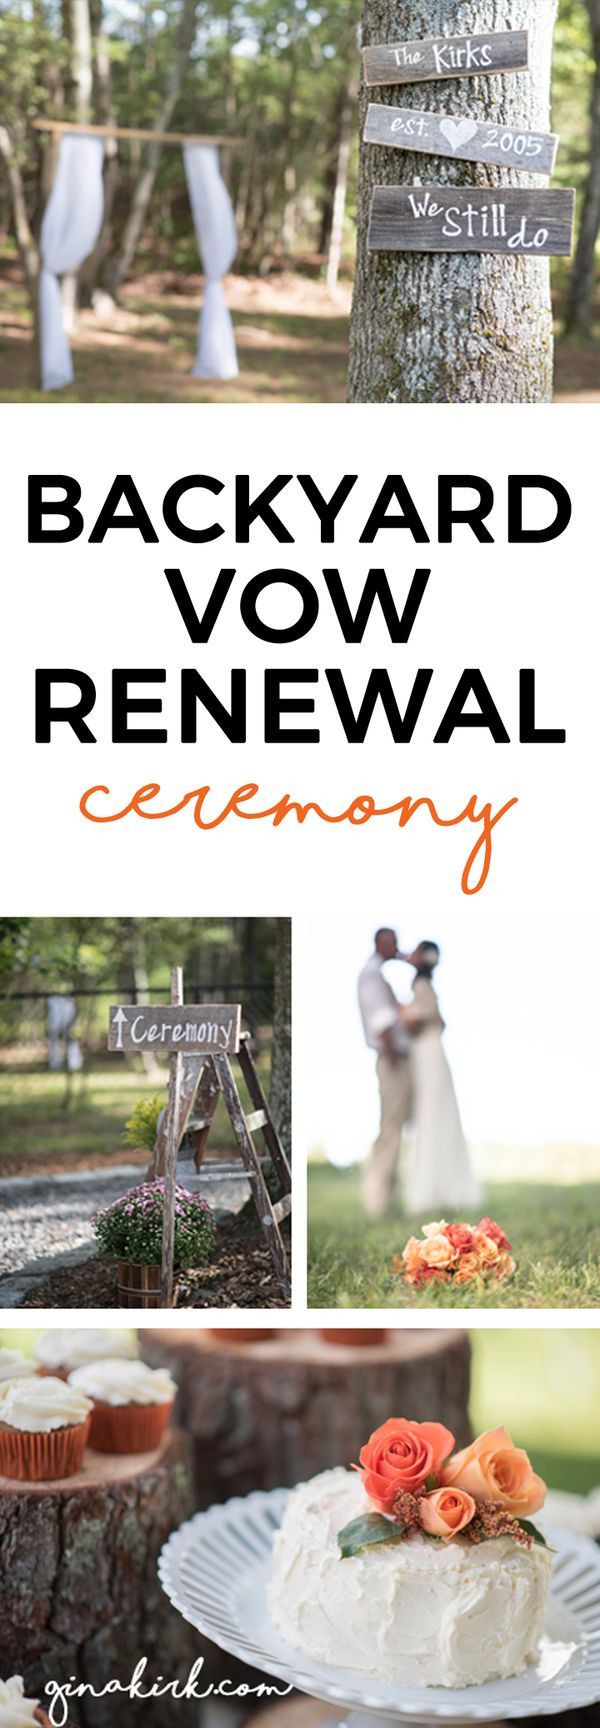 Ideas For Renewing Wedding Vows
 Celebrating 10 Years Our Backyard Vow Renewal